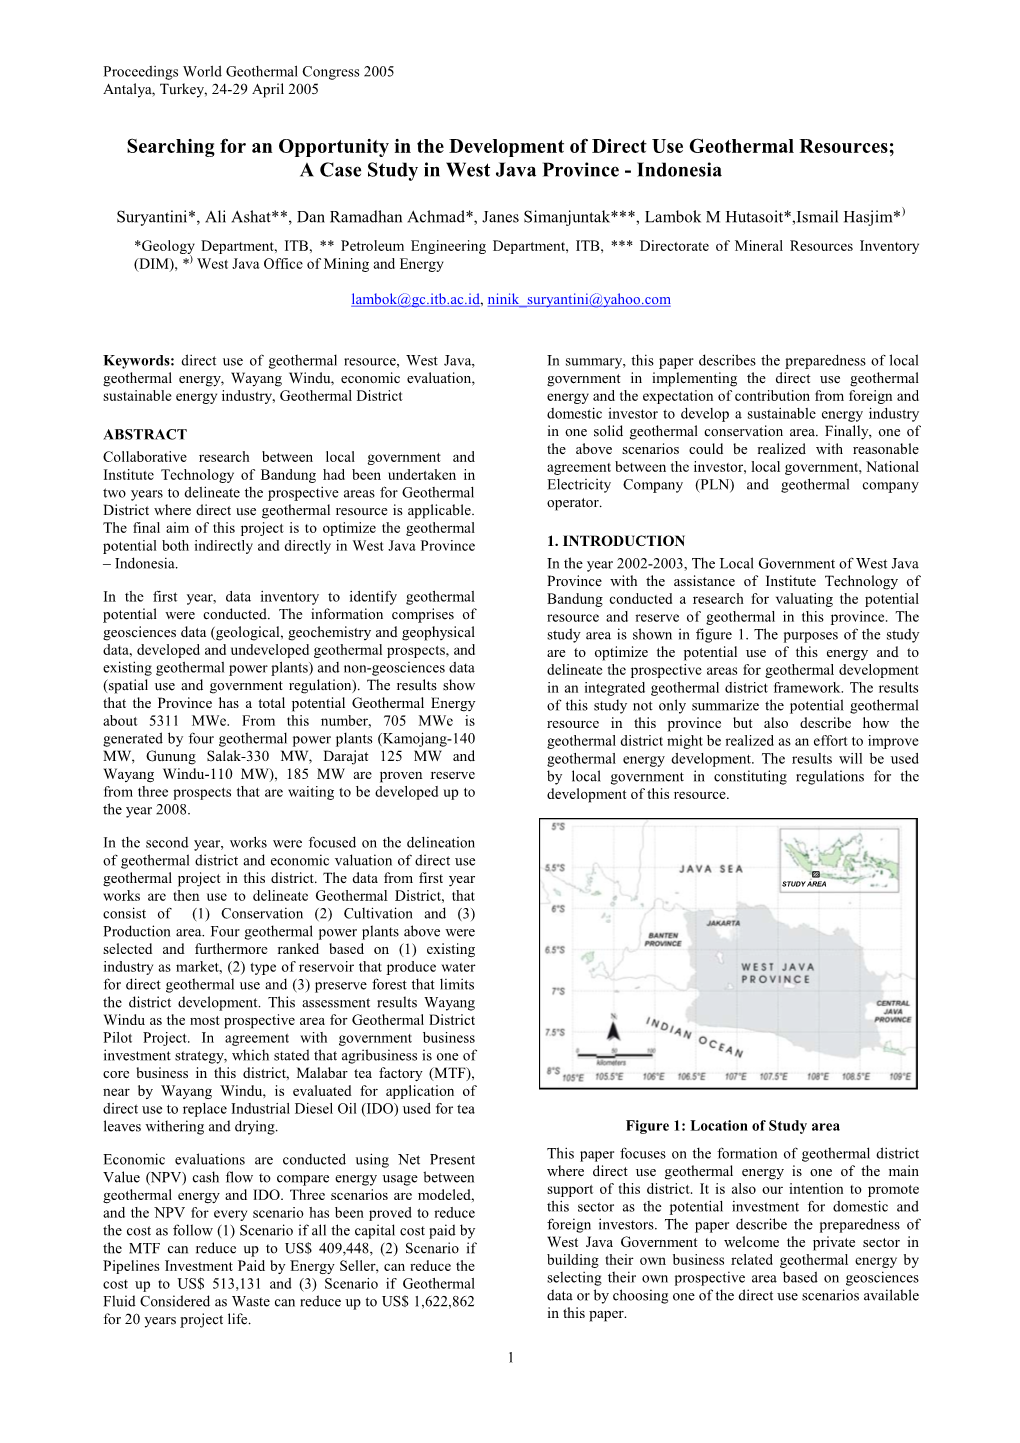 Searching for an Opportunity in the Development of Direct Use Geothermal Resource; a Case Study in West Java Province